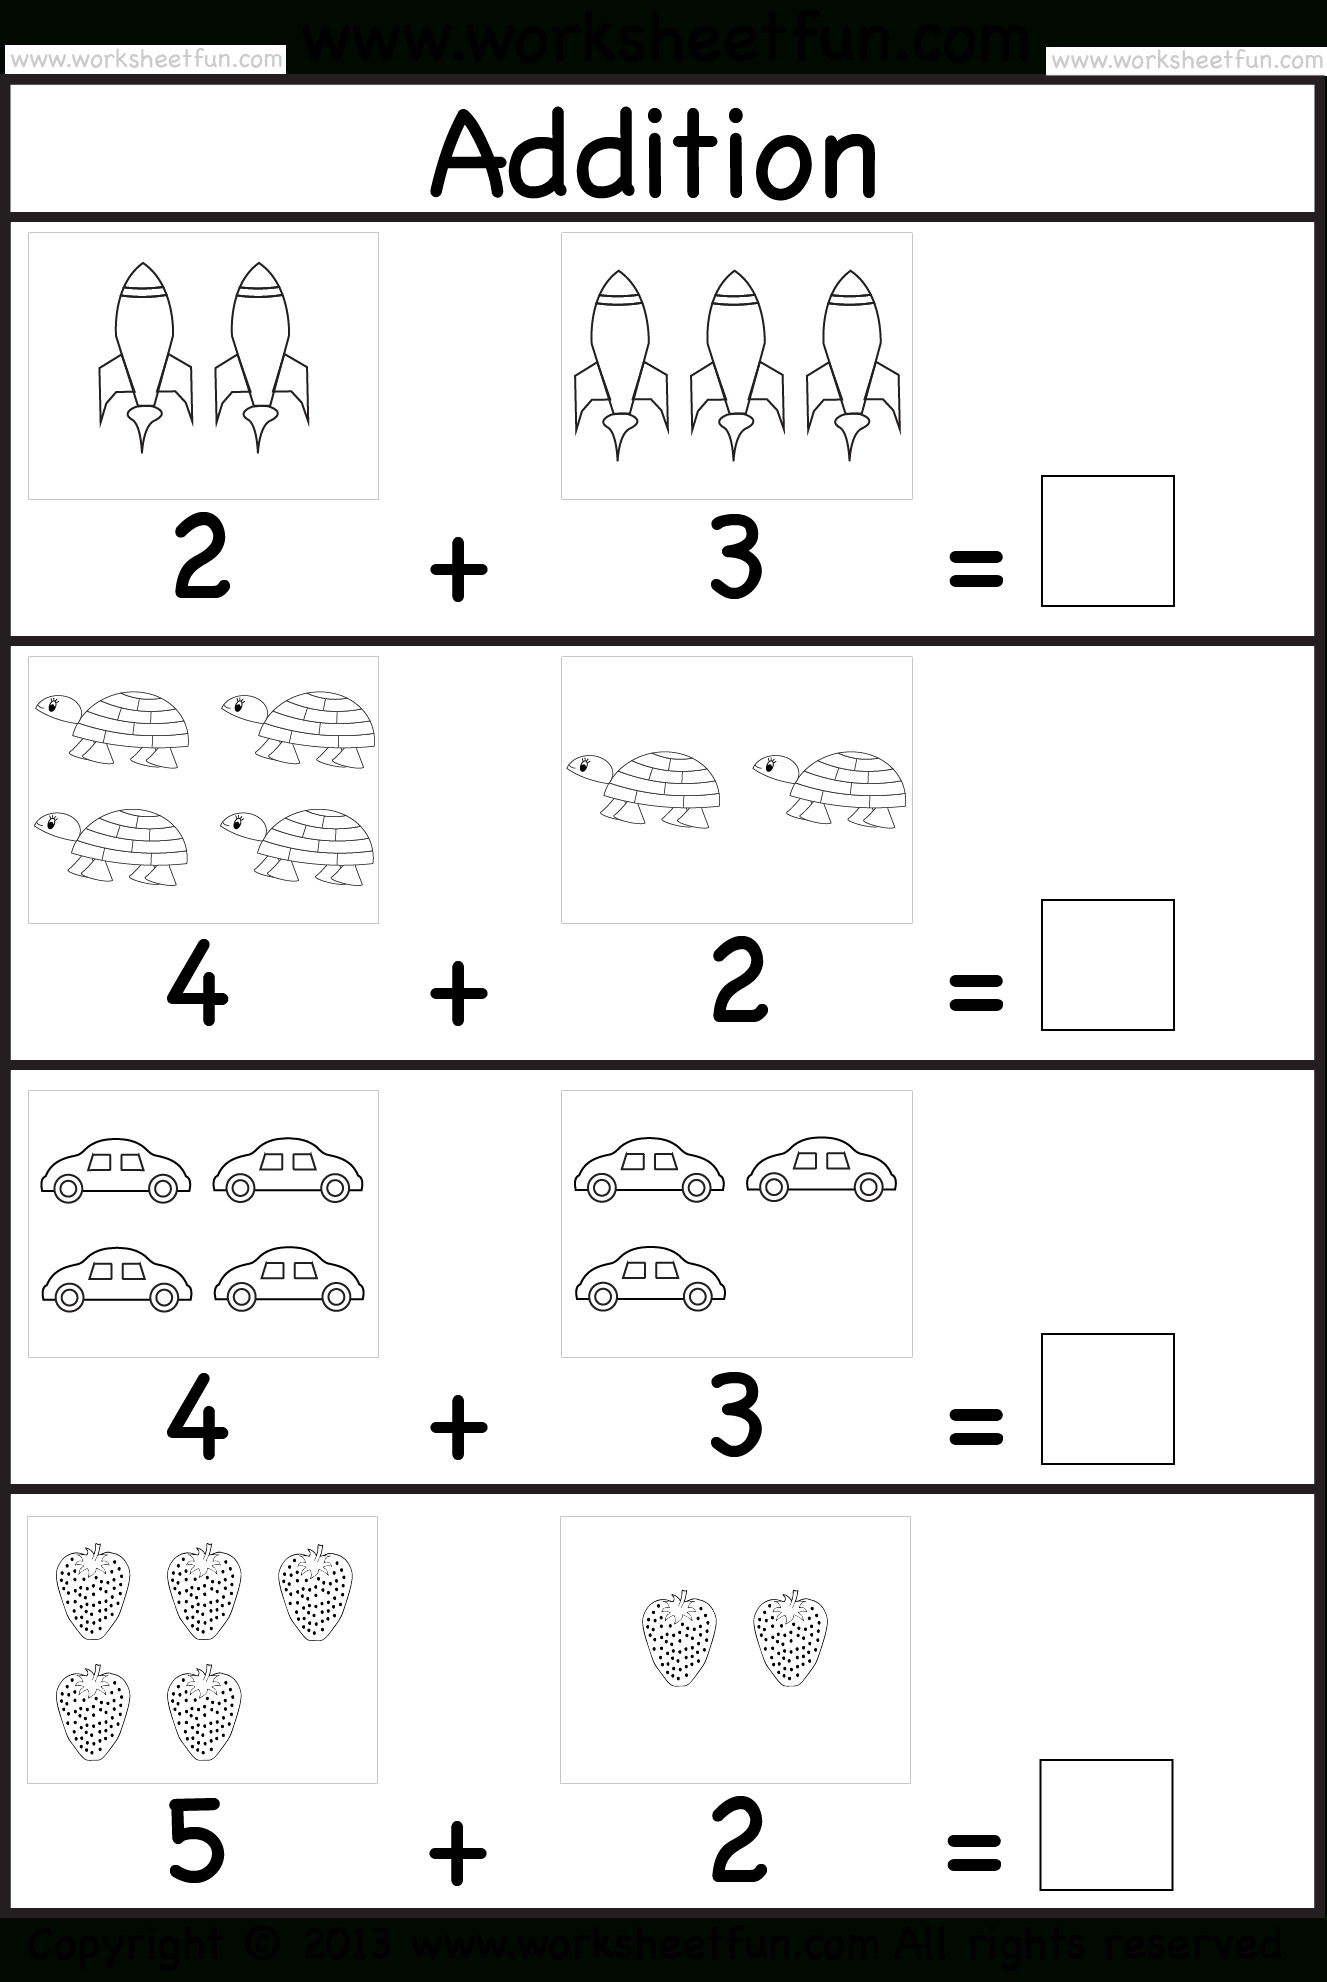 Addition Worksheet. This Site Has Great Free Worksheets For - Free Printable Preschool Addition Worksheets